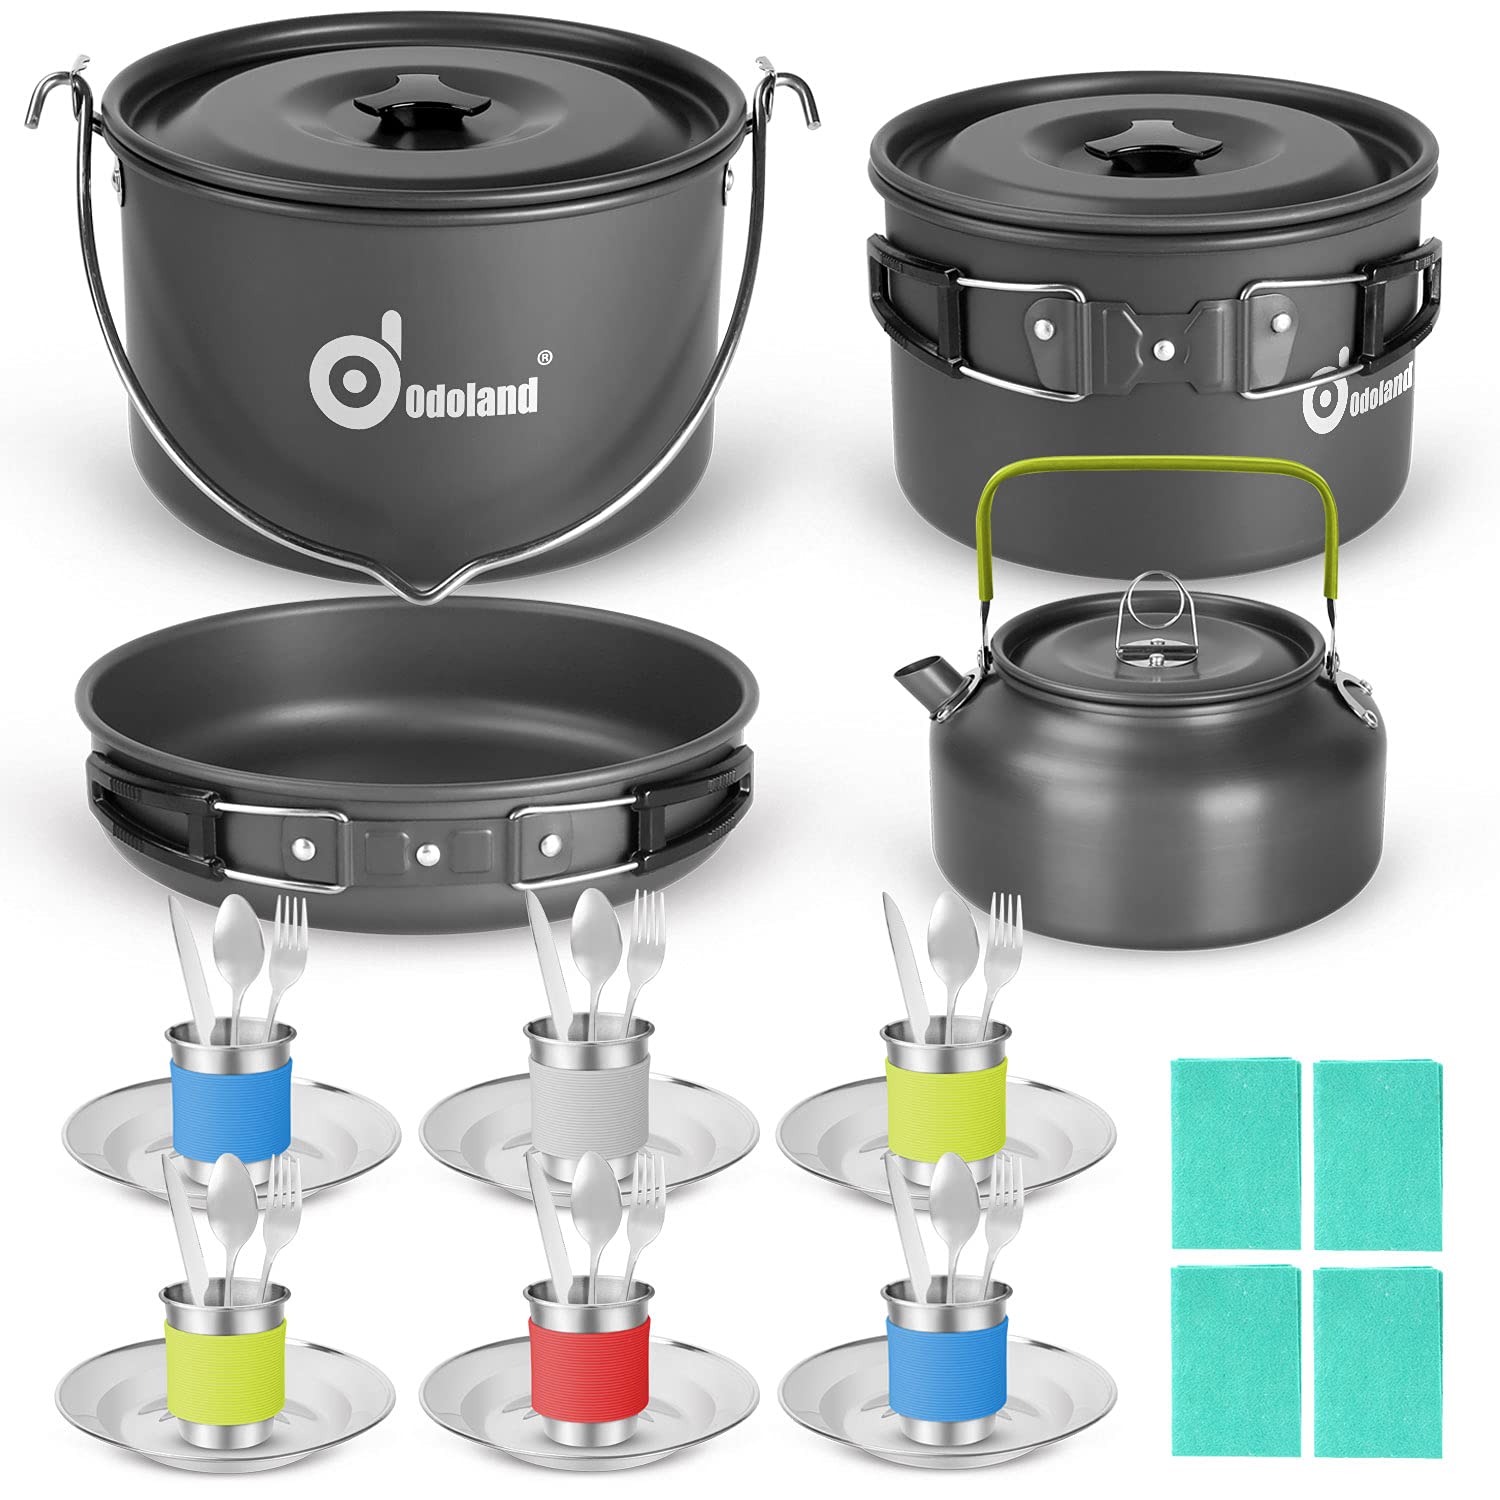 Odoland 39pcs Camping Cookware Mess Kit Non-Stick Large Size Hanging Pot Pan Kettle with Base Dinner Cutlery Sets for 6 and